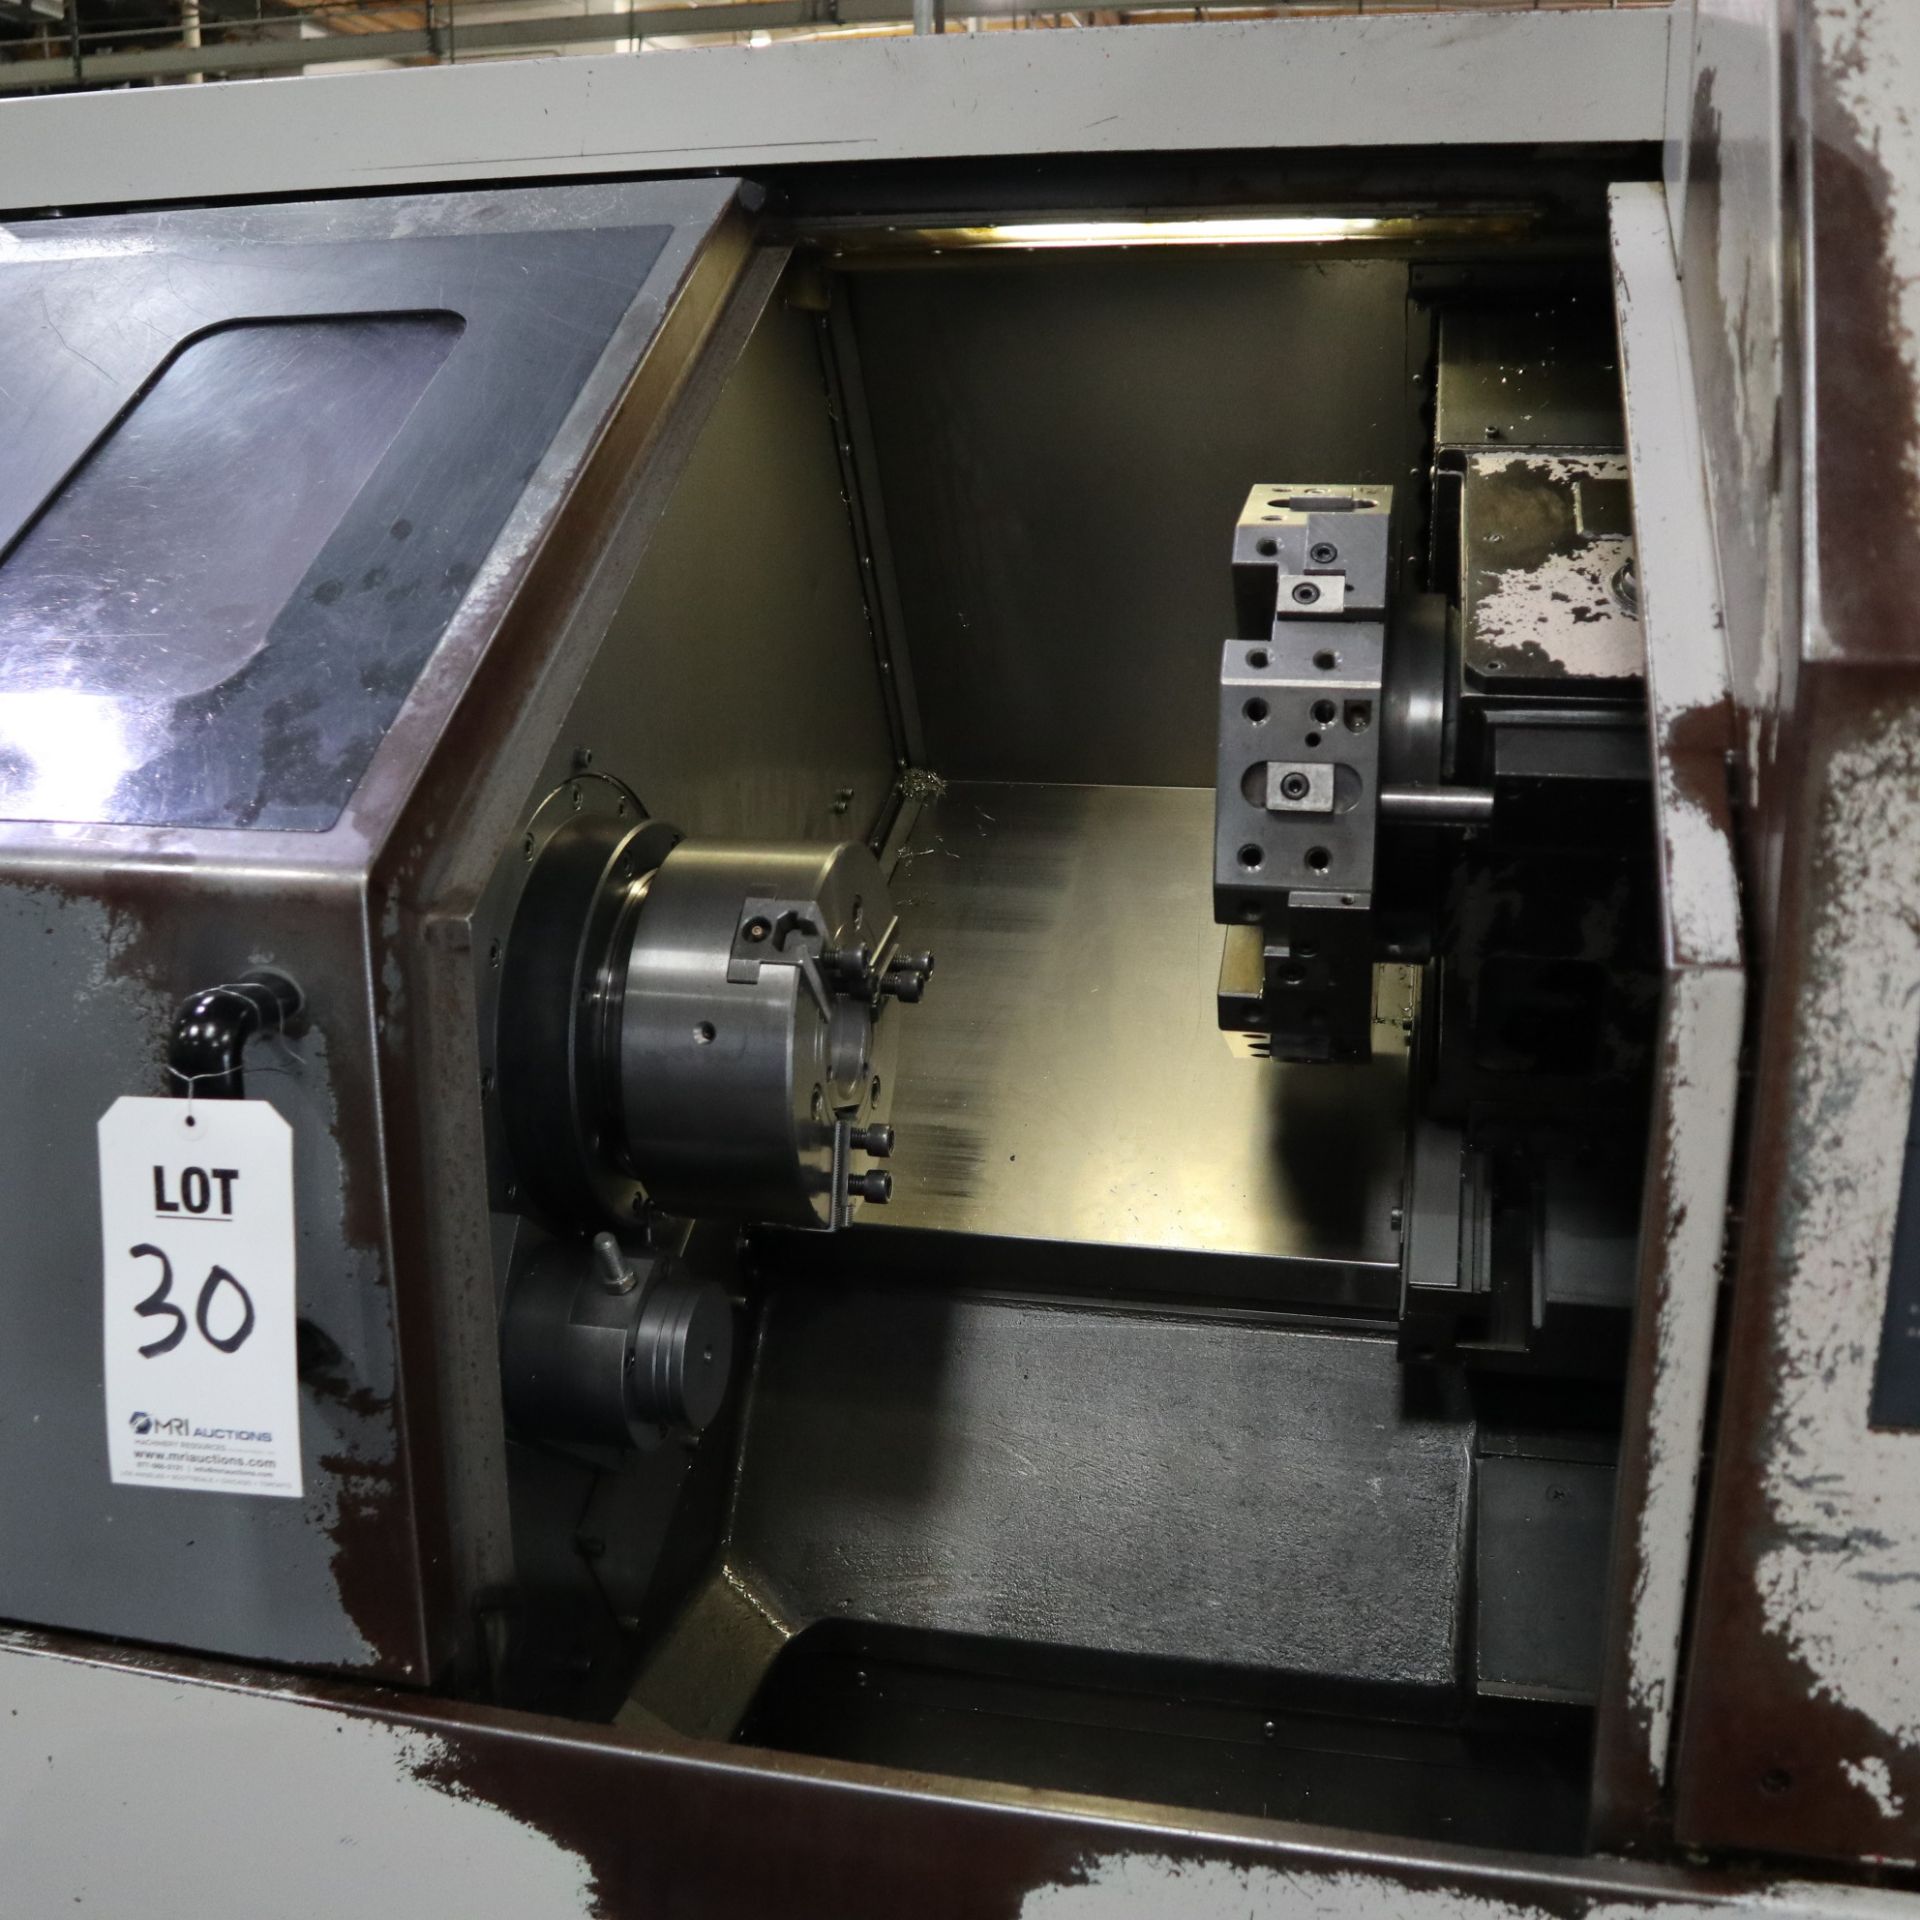 1995 MORI SEIKI CL-20A CNC LATHE, S/N 1517, TOOL SETTER, COLLET CHUCK, YASNAC CONTROL, MANUALS, TOOL - Image 3 of 8